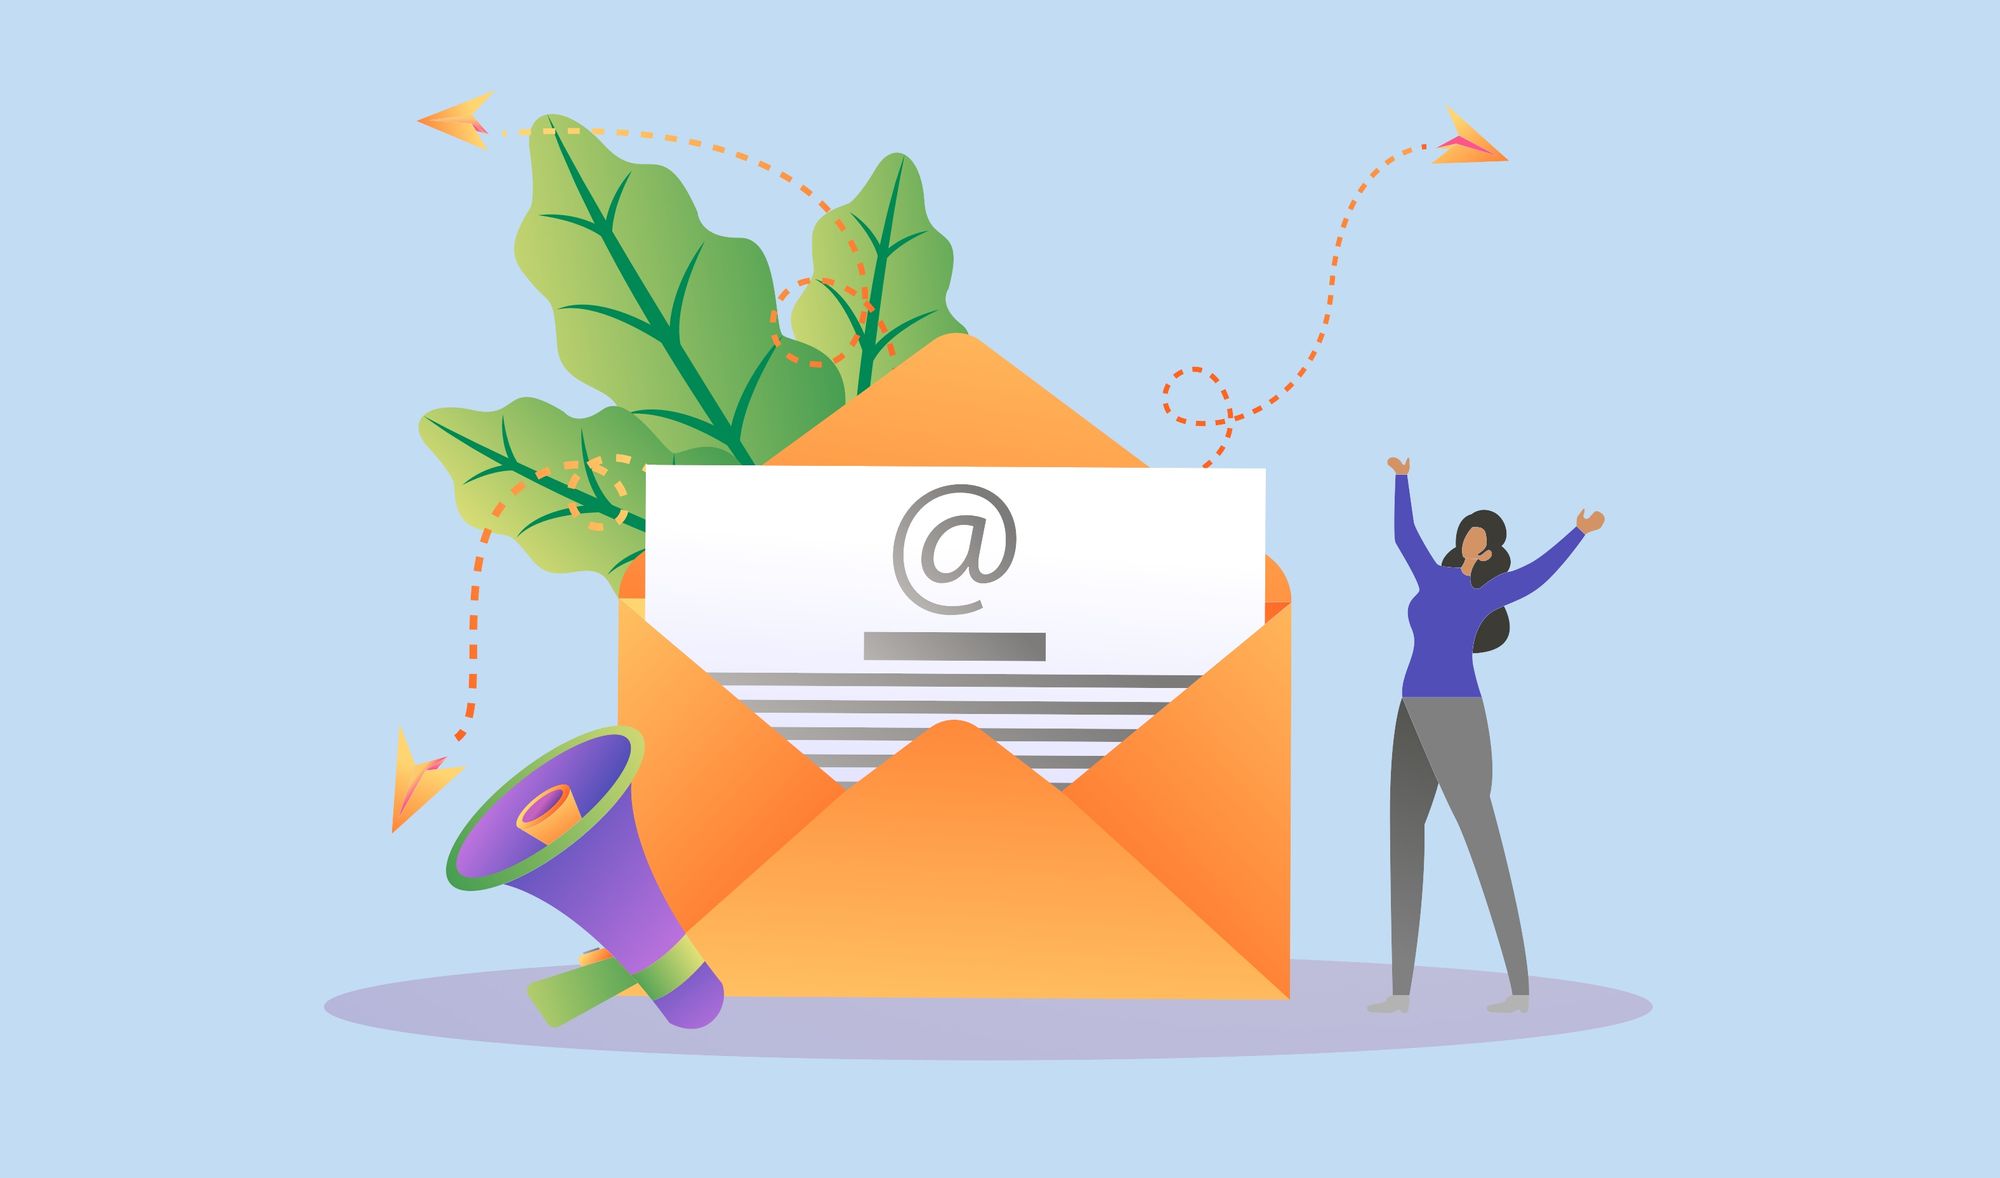 Hey, your e-mail matters more than hype